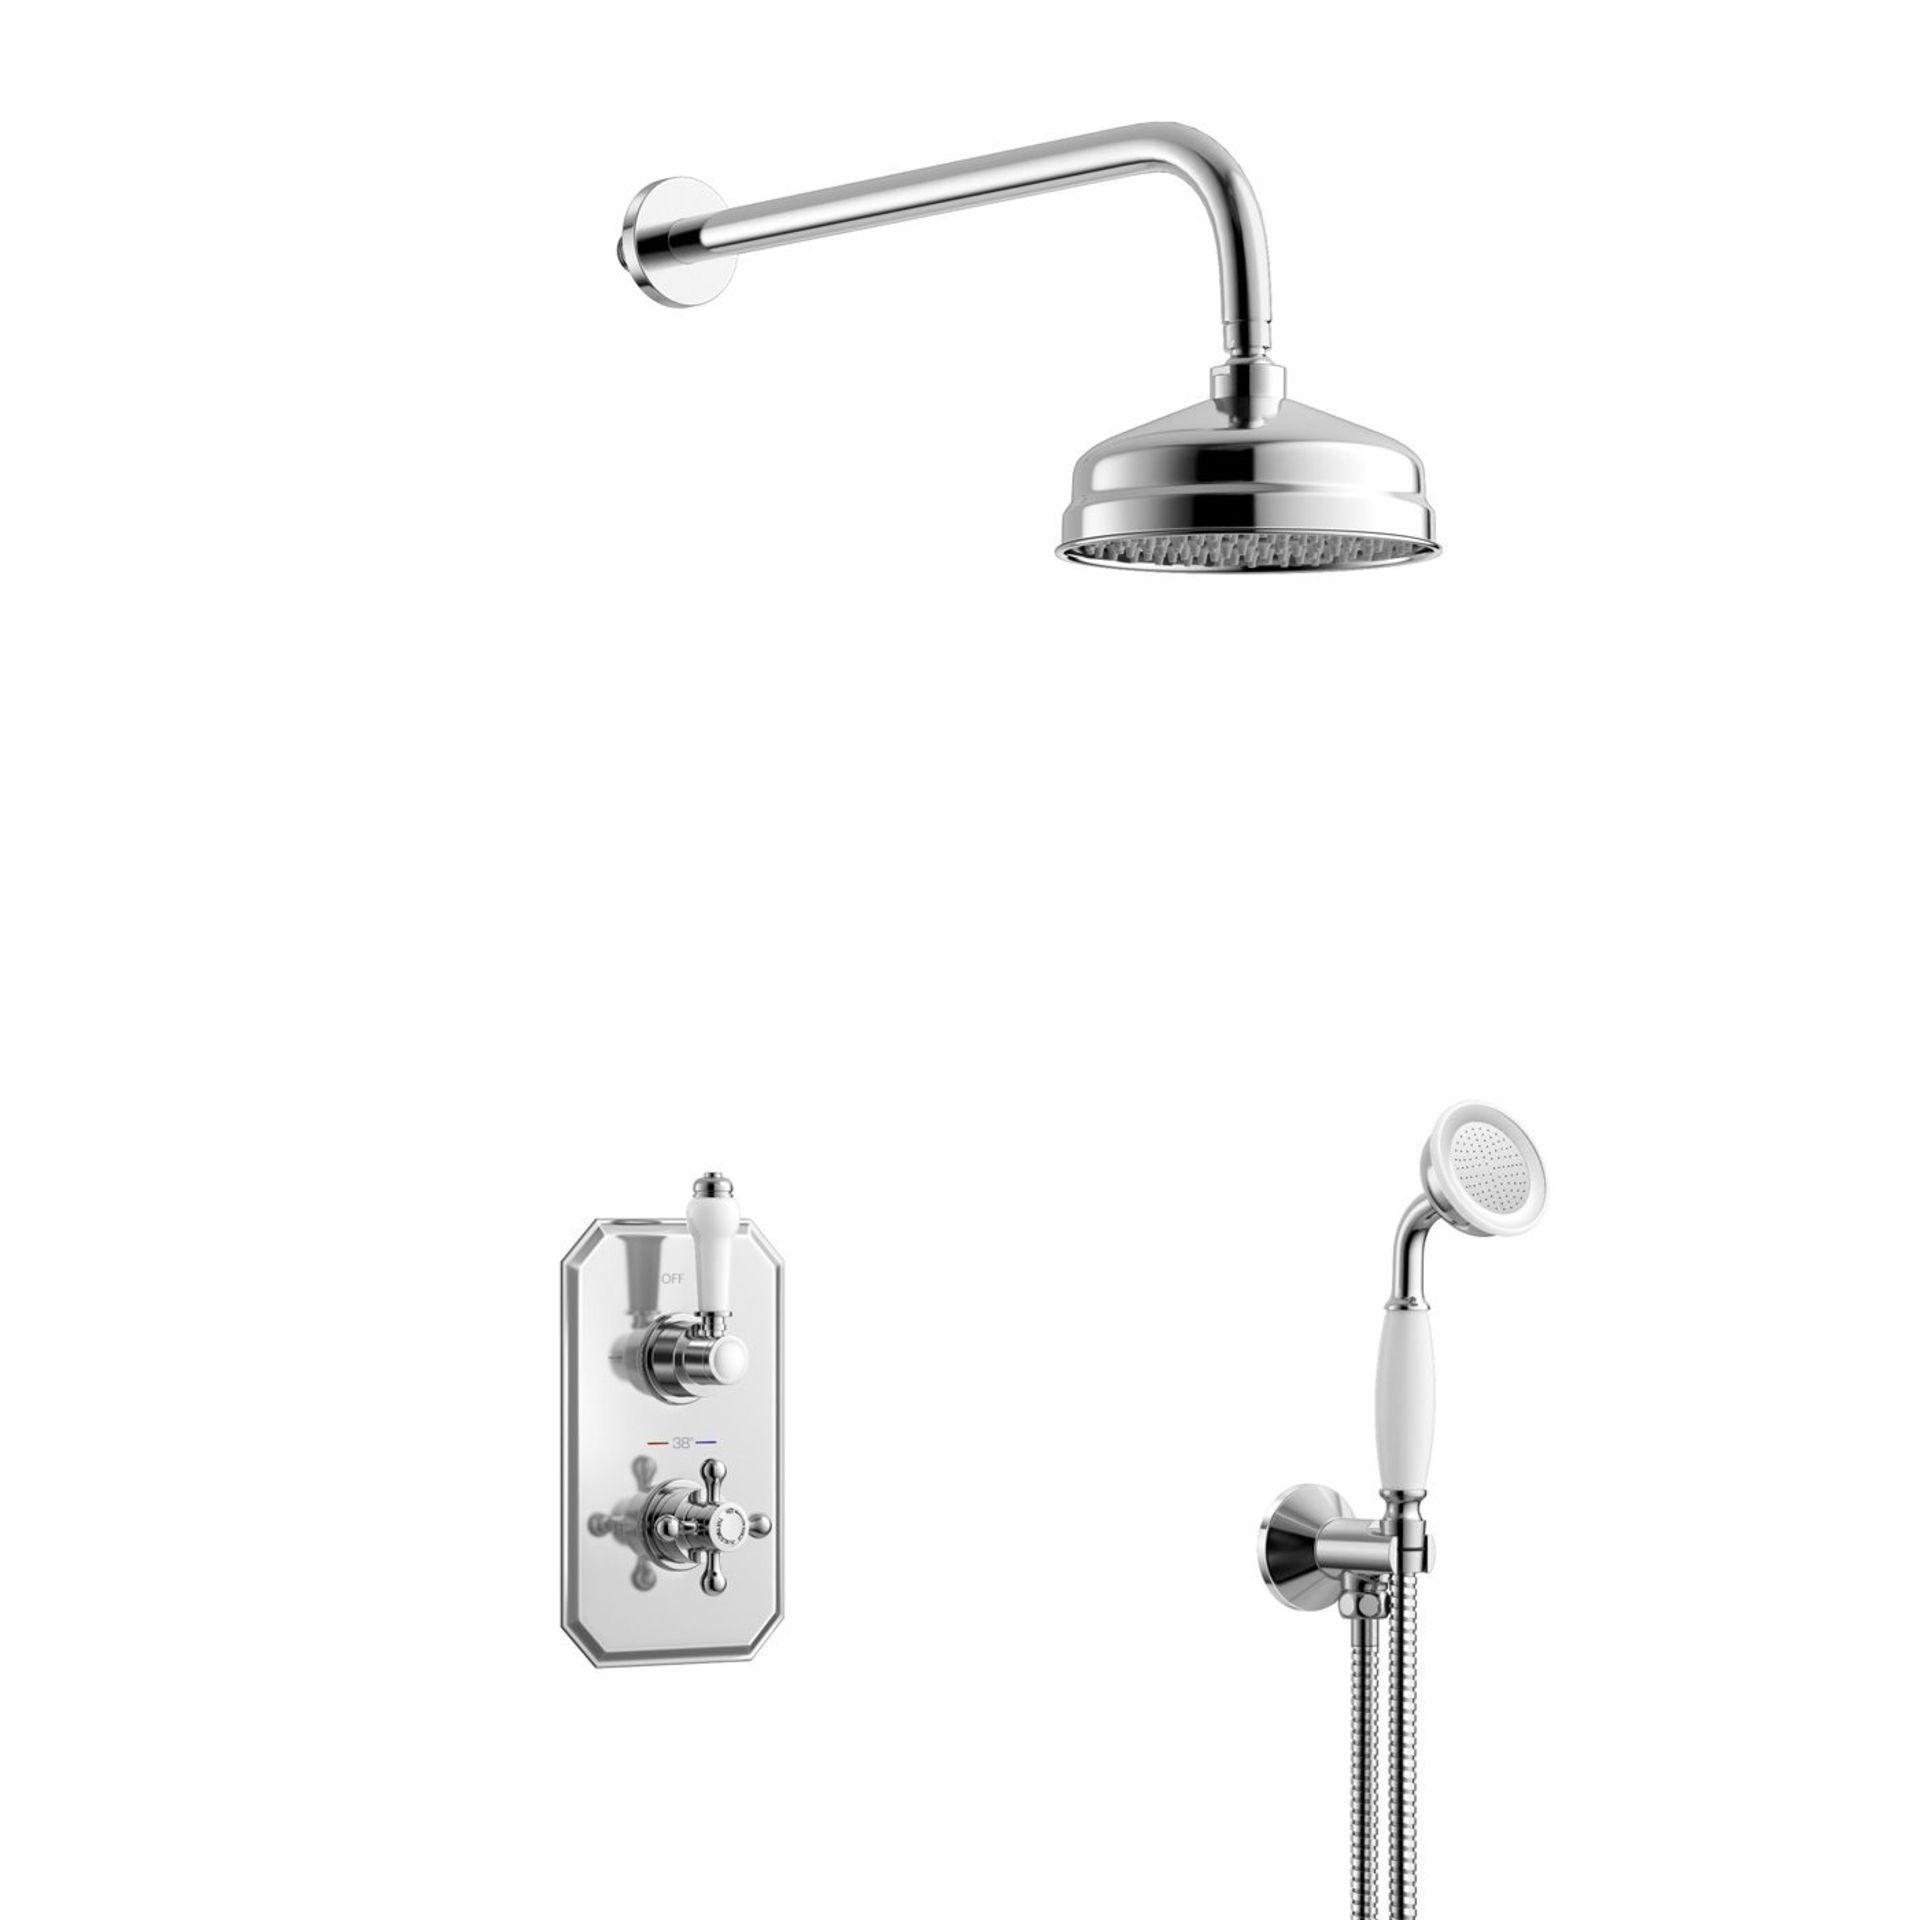 New & Boxed 150 mm Traditional Stainless Steel Wall Mounted Head, Rail Kit. RRP £511.99.Ss2Wctr - Image 2 of 2